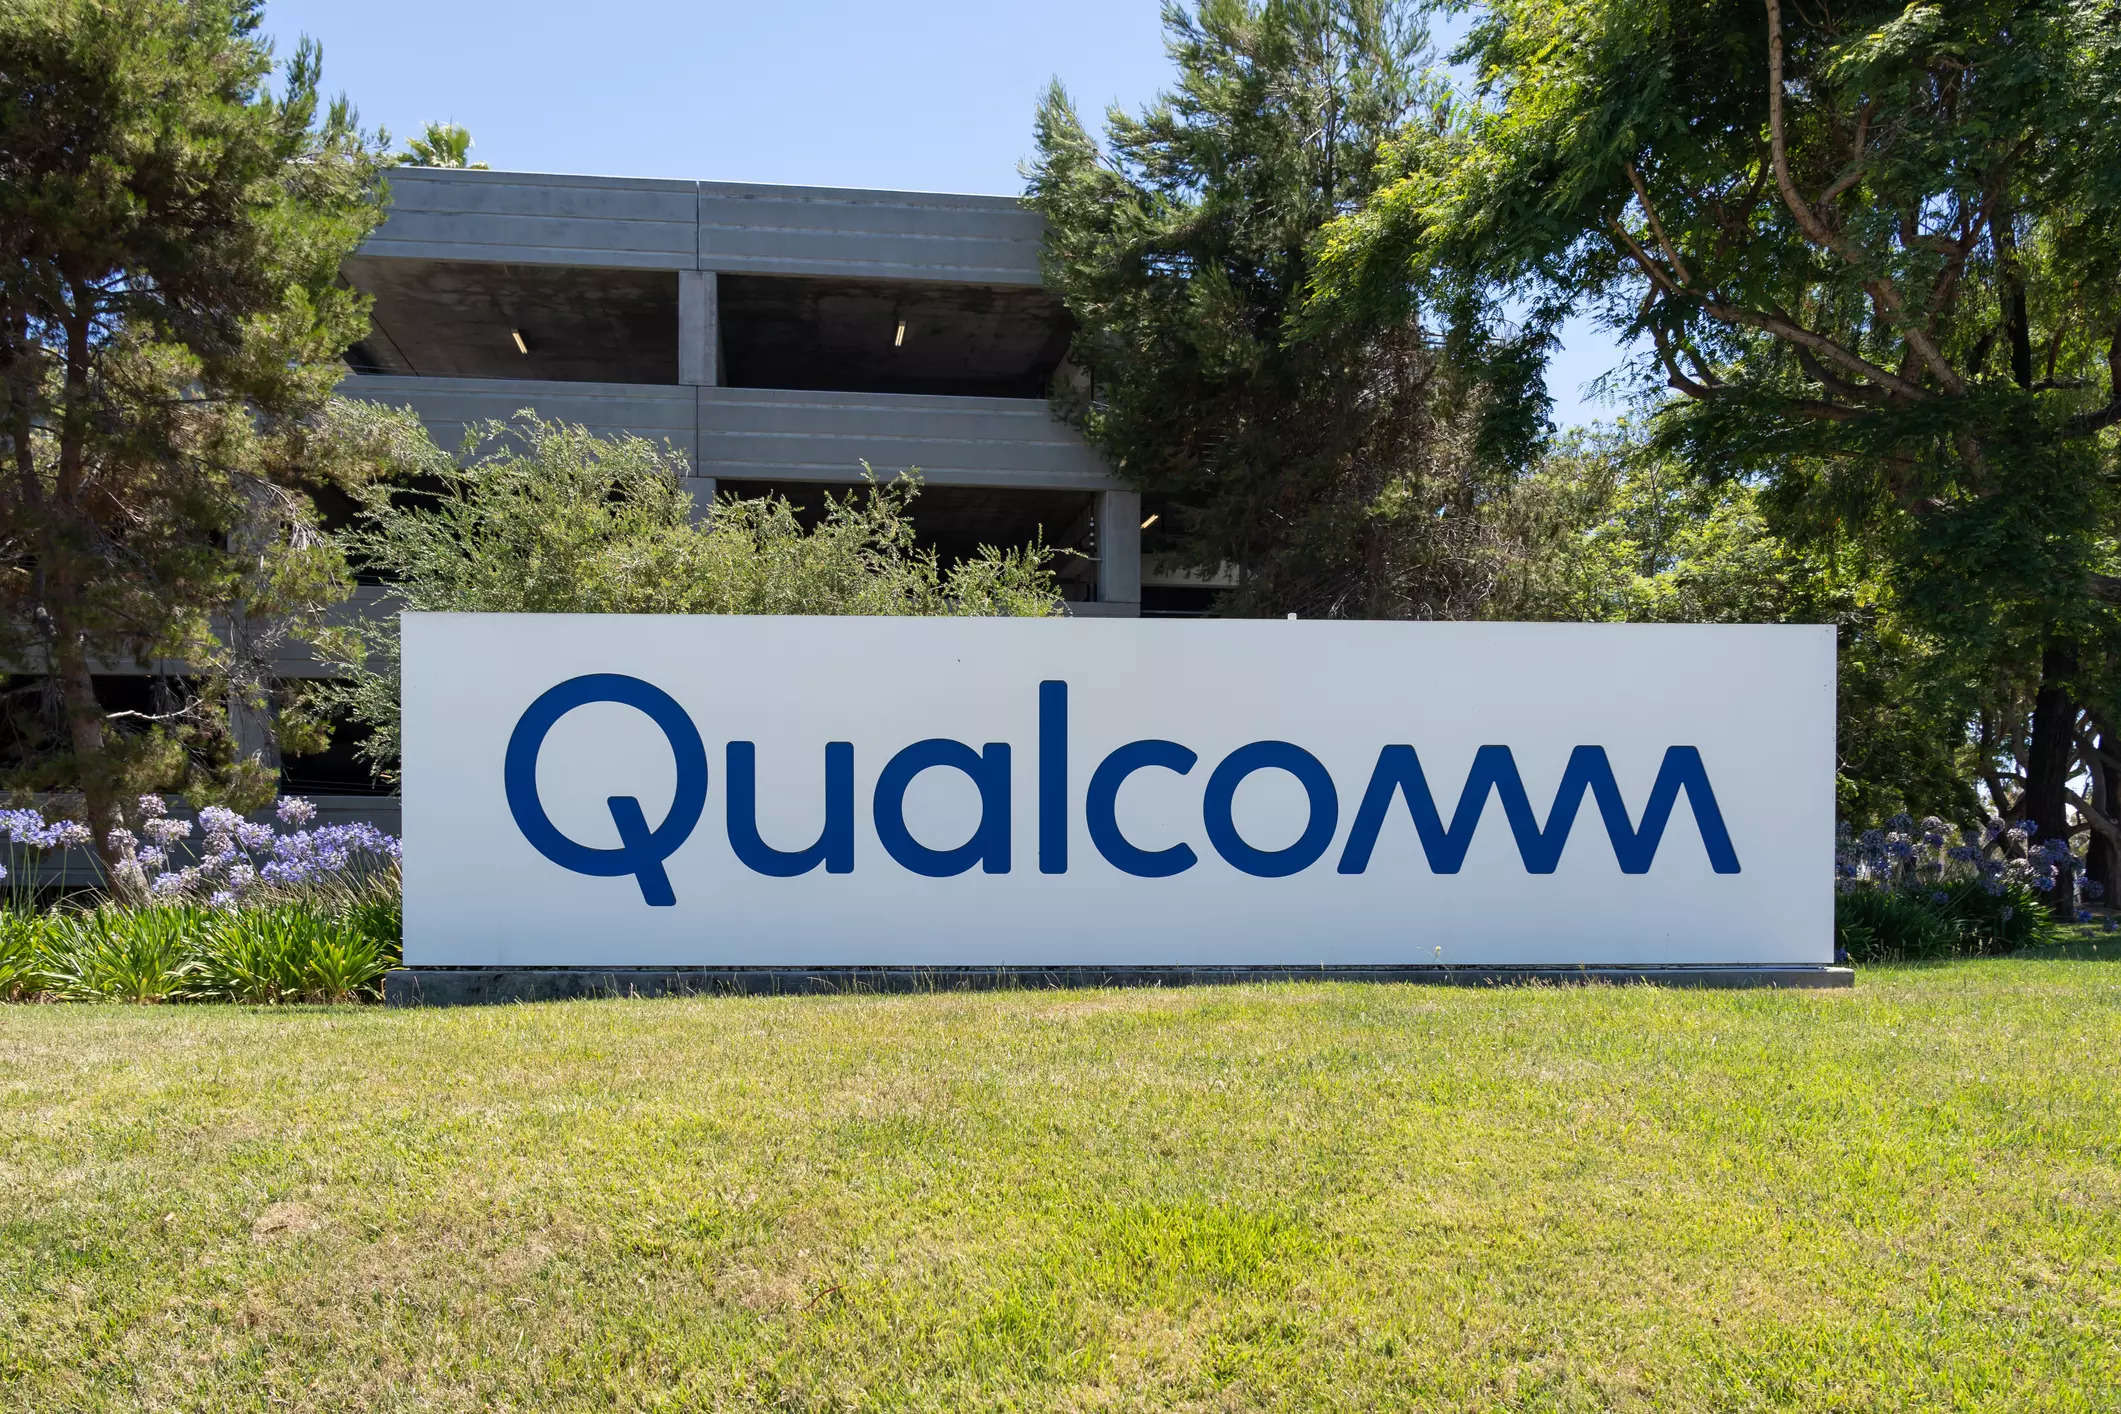  Qualcomm also announced that it has partnered with the automotive company Visteon to accelerate the development of &quot;high-performance cockpit domain controller designed to enable global automakers to build next-generation cockpits.&quot;